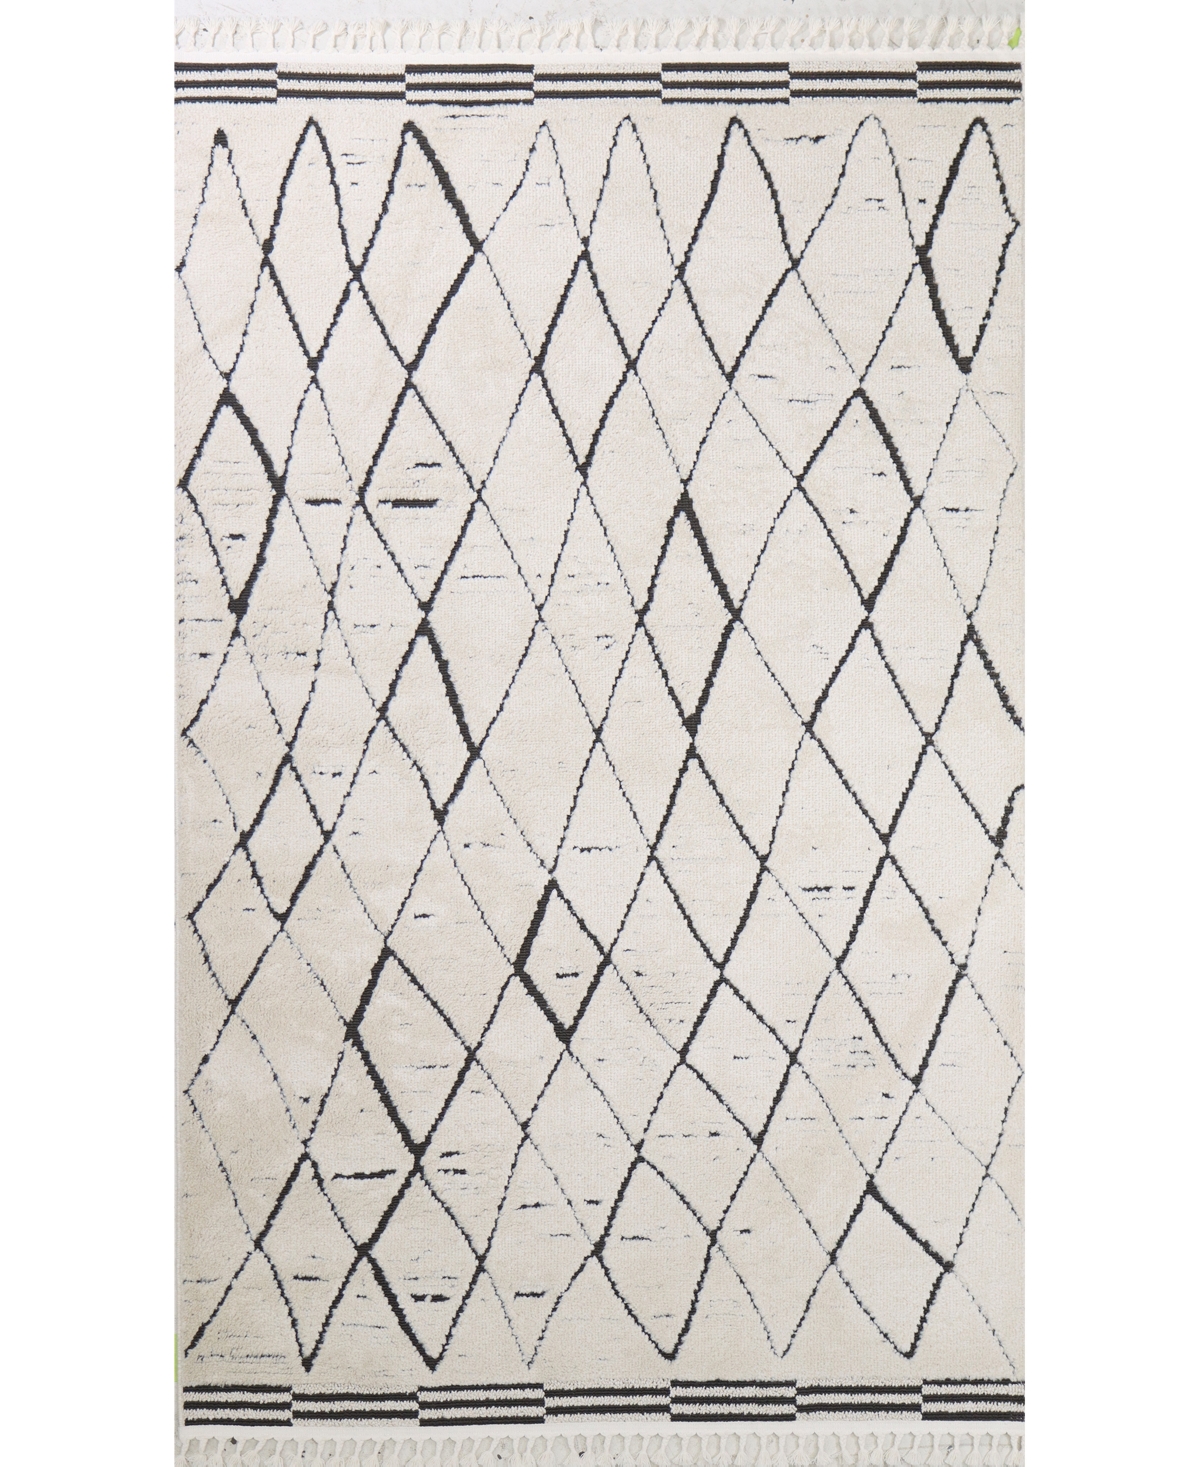 Bb Rugs Closeout!  Wainscott Wst203 7'6" X 9'6" Area Rug In Ivory